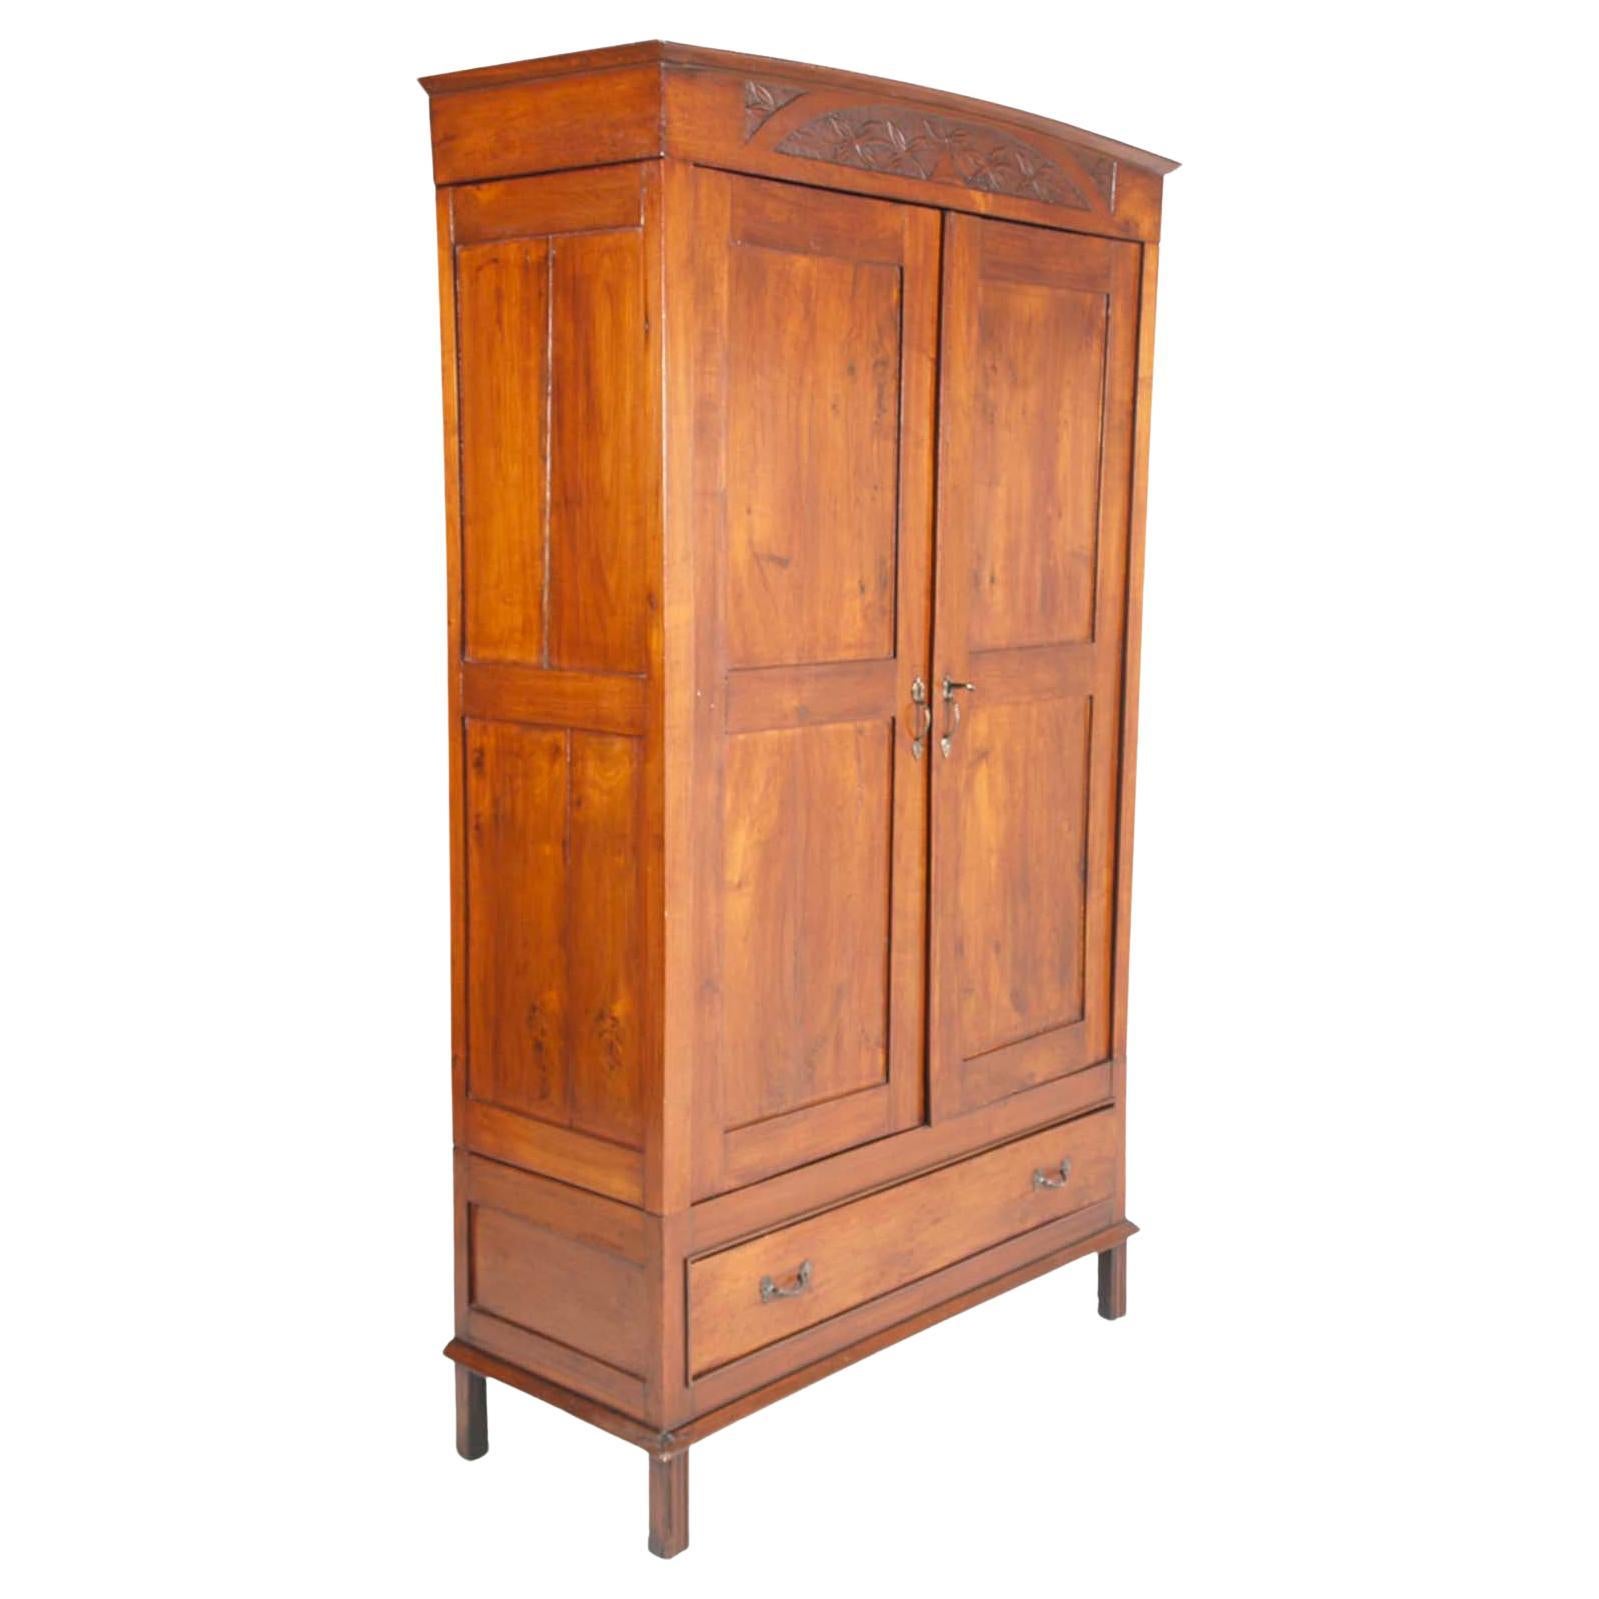 Florentine Art Nouveau Wardrobe in Solid Cherry Wood by Dini & Puccini, Cascina